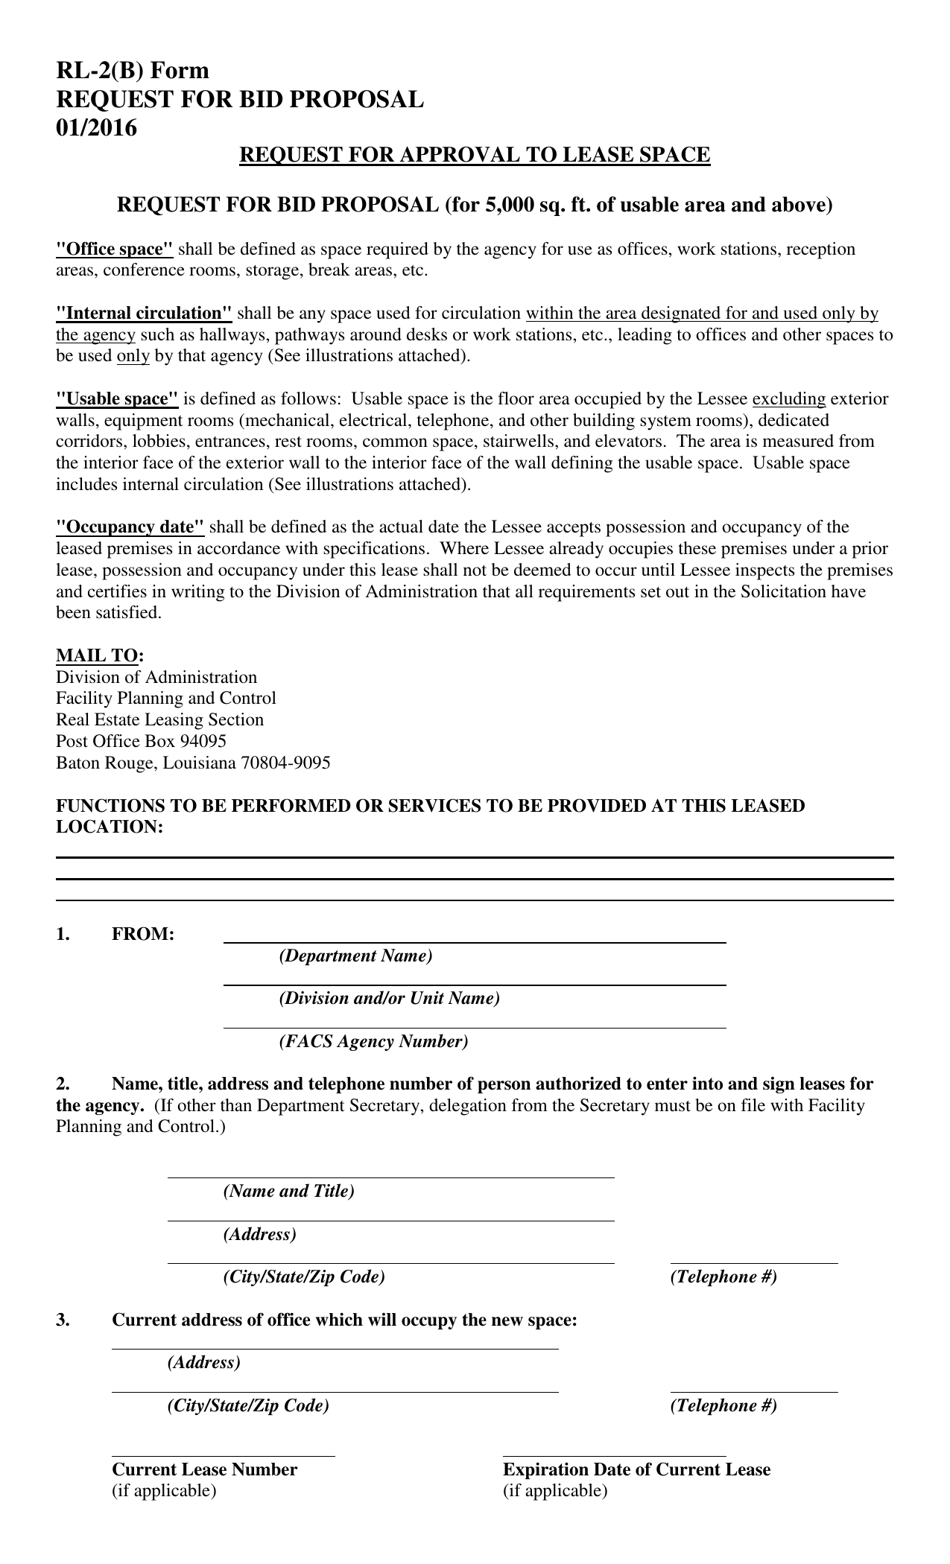 Form RL-2(B) Request for Bid Proposal - Louisiana, Page 1